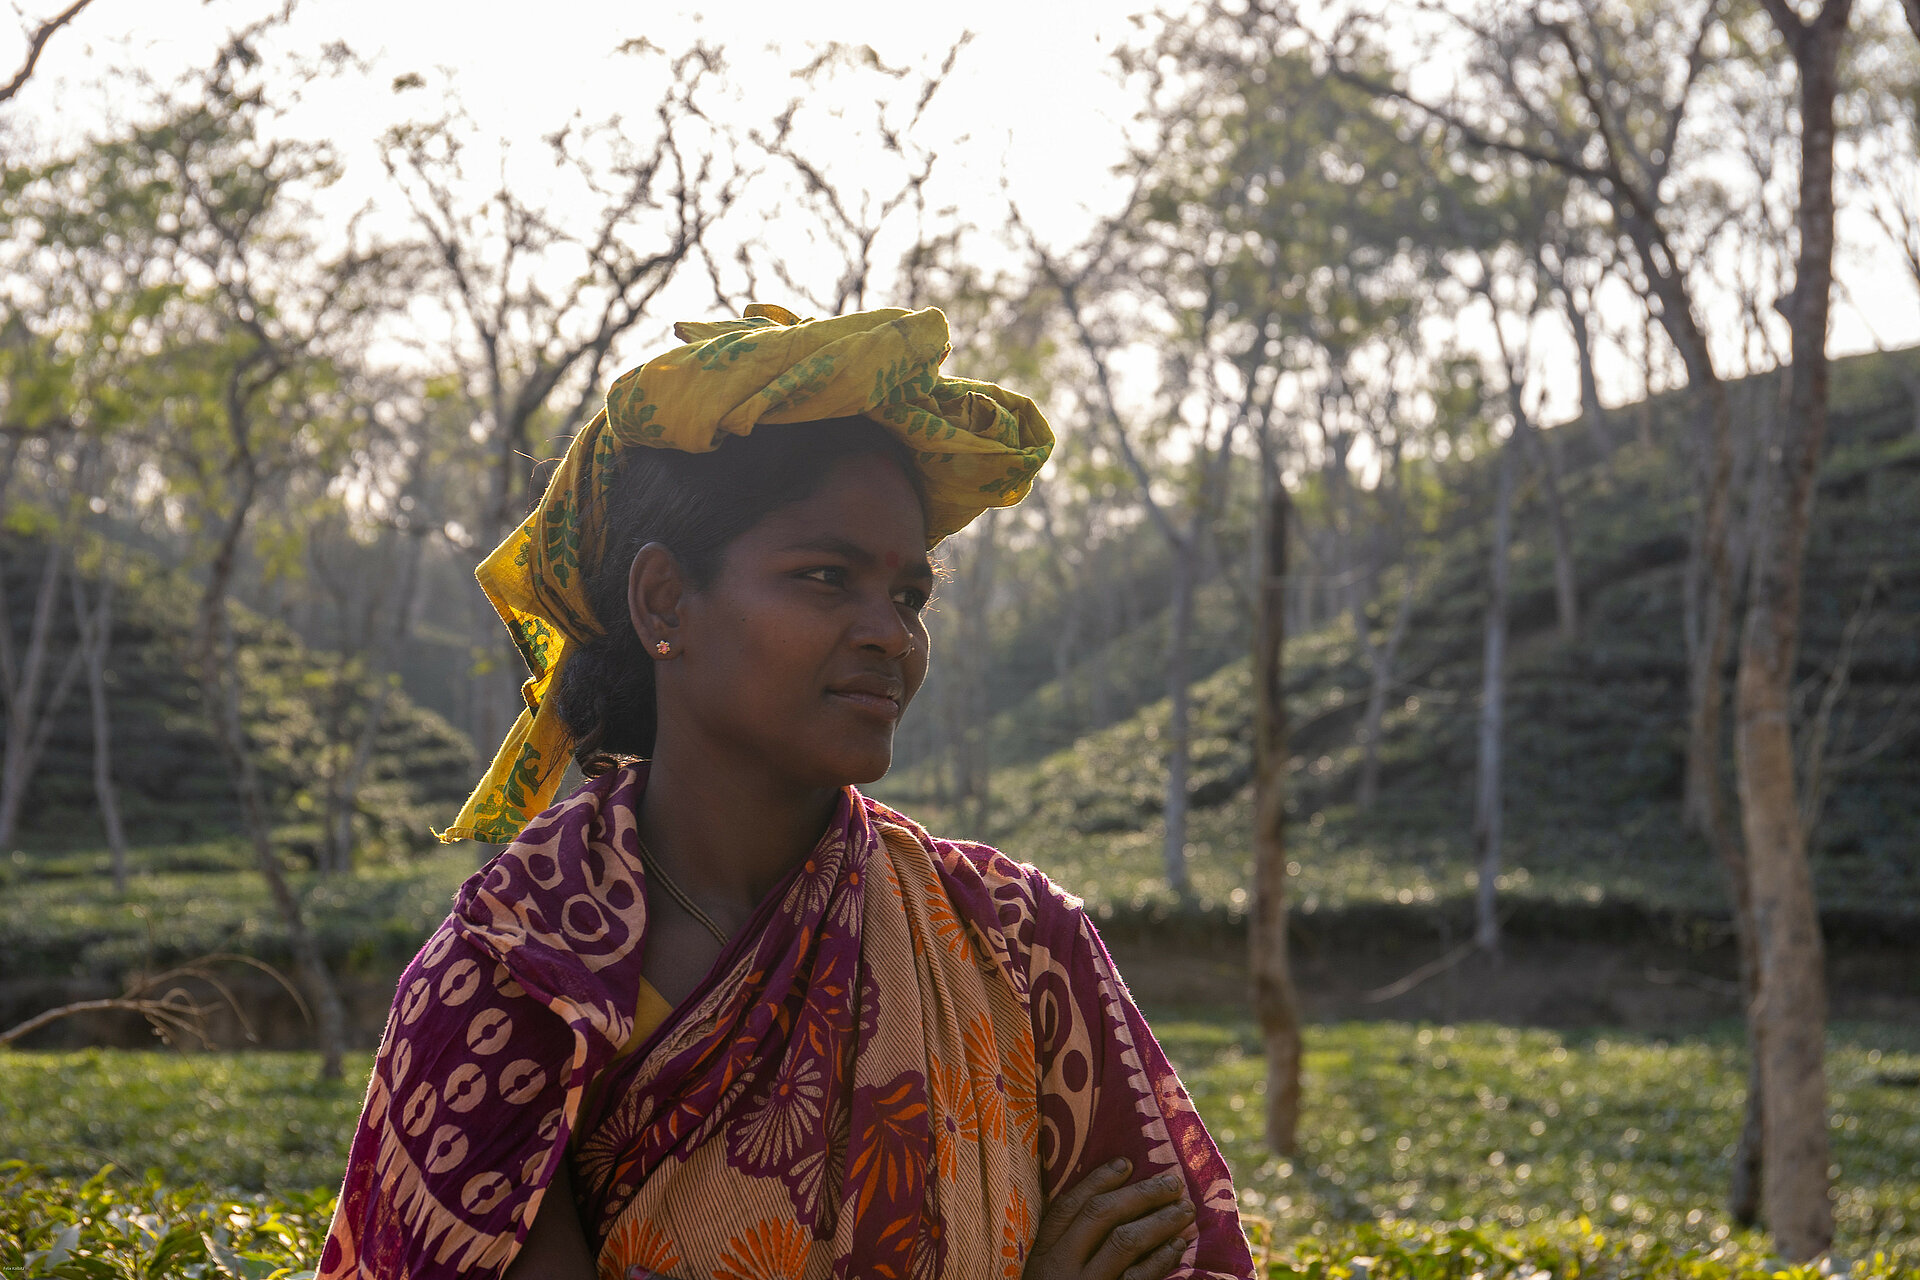 New collective bargaining skills help Bangladesh’s tea picker fight for fair conditions